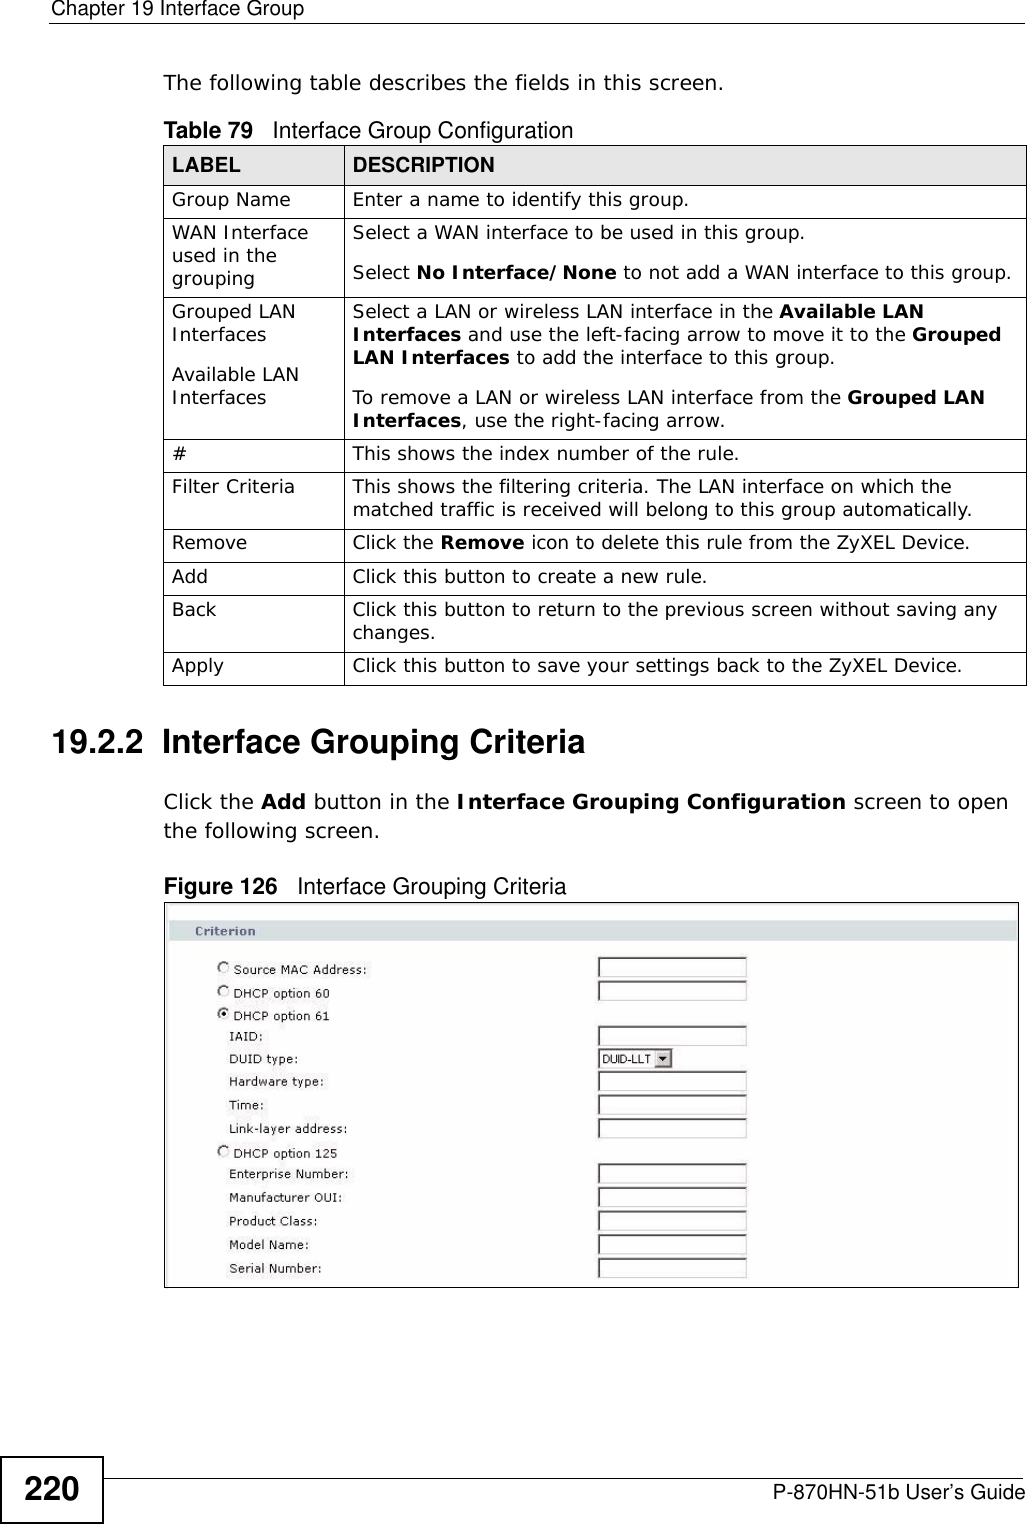 Chapter 19 Interface GroupP-870HN-51b User’s Guide220The following table describes the fields in this screen. 19.2.2  Interface Grouping CriteriaClick the Add button in the Interface Grouping Configuration screen to open the following screen. Figure 126   Interface Grouping Criteria Table 79   Interface Group ConfigurationLABEL DESCRIPTIONGroup Name Enter a name to identify this group.WAN Interface used in the groupingSelect a WAN interface to be used in this group.Select No Interface/None to not add a WAN interface to this group.Grouped LAN InterfacesAvailable LAN InterfacesSelect a LAN or wireless LAN interface in the Available LAN Interfaces and use the left-facing arrow to move it to the Grouped LAN Interfaces to add the interface to this group.To remove a LAN or wireless LAN interface from the Grouped LAN Interfaces, use the right-facing arrow.#This shows the index number of the rule.Filter Criteria This shows the filtering criteria. The LAN interface on which the matched traffic is received will belong to this group automatically.Remove Click the Remove icon to delete this rule from the ZyXEL Device.Add Click this button to create a new rule.Back Click this button to return to the previous screen without saving any changes.Apply Click this button to save your settings back to the ZyXEL Device.